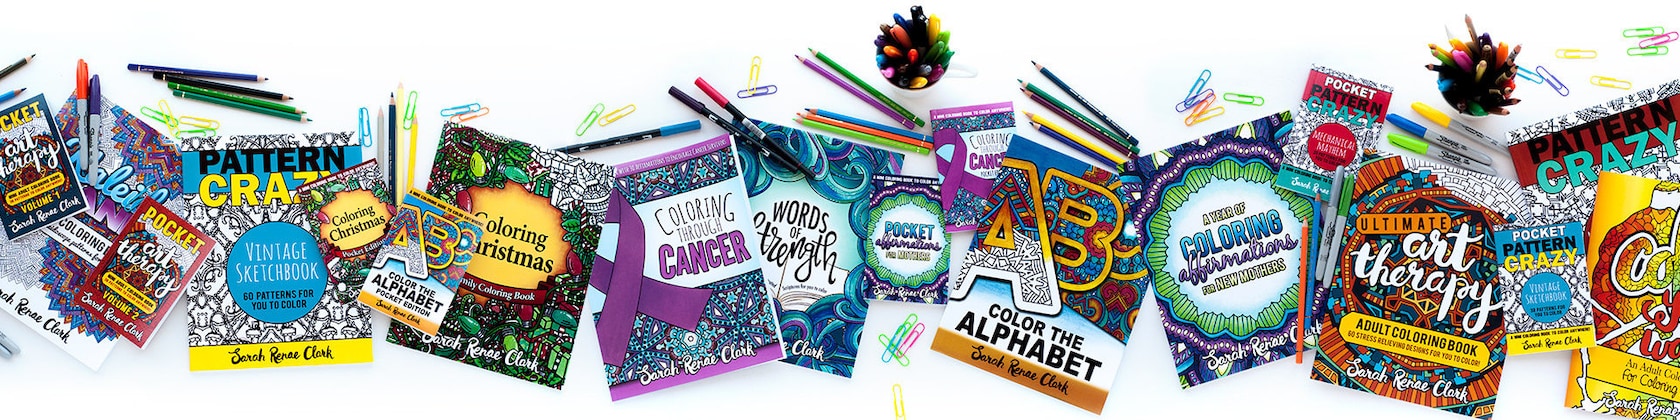 20 Clever Ways to Organize Your Coloring Supplies - Sarah Renae Clark -  Coloring Book Artist and Designer